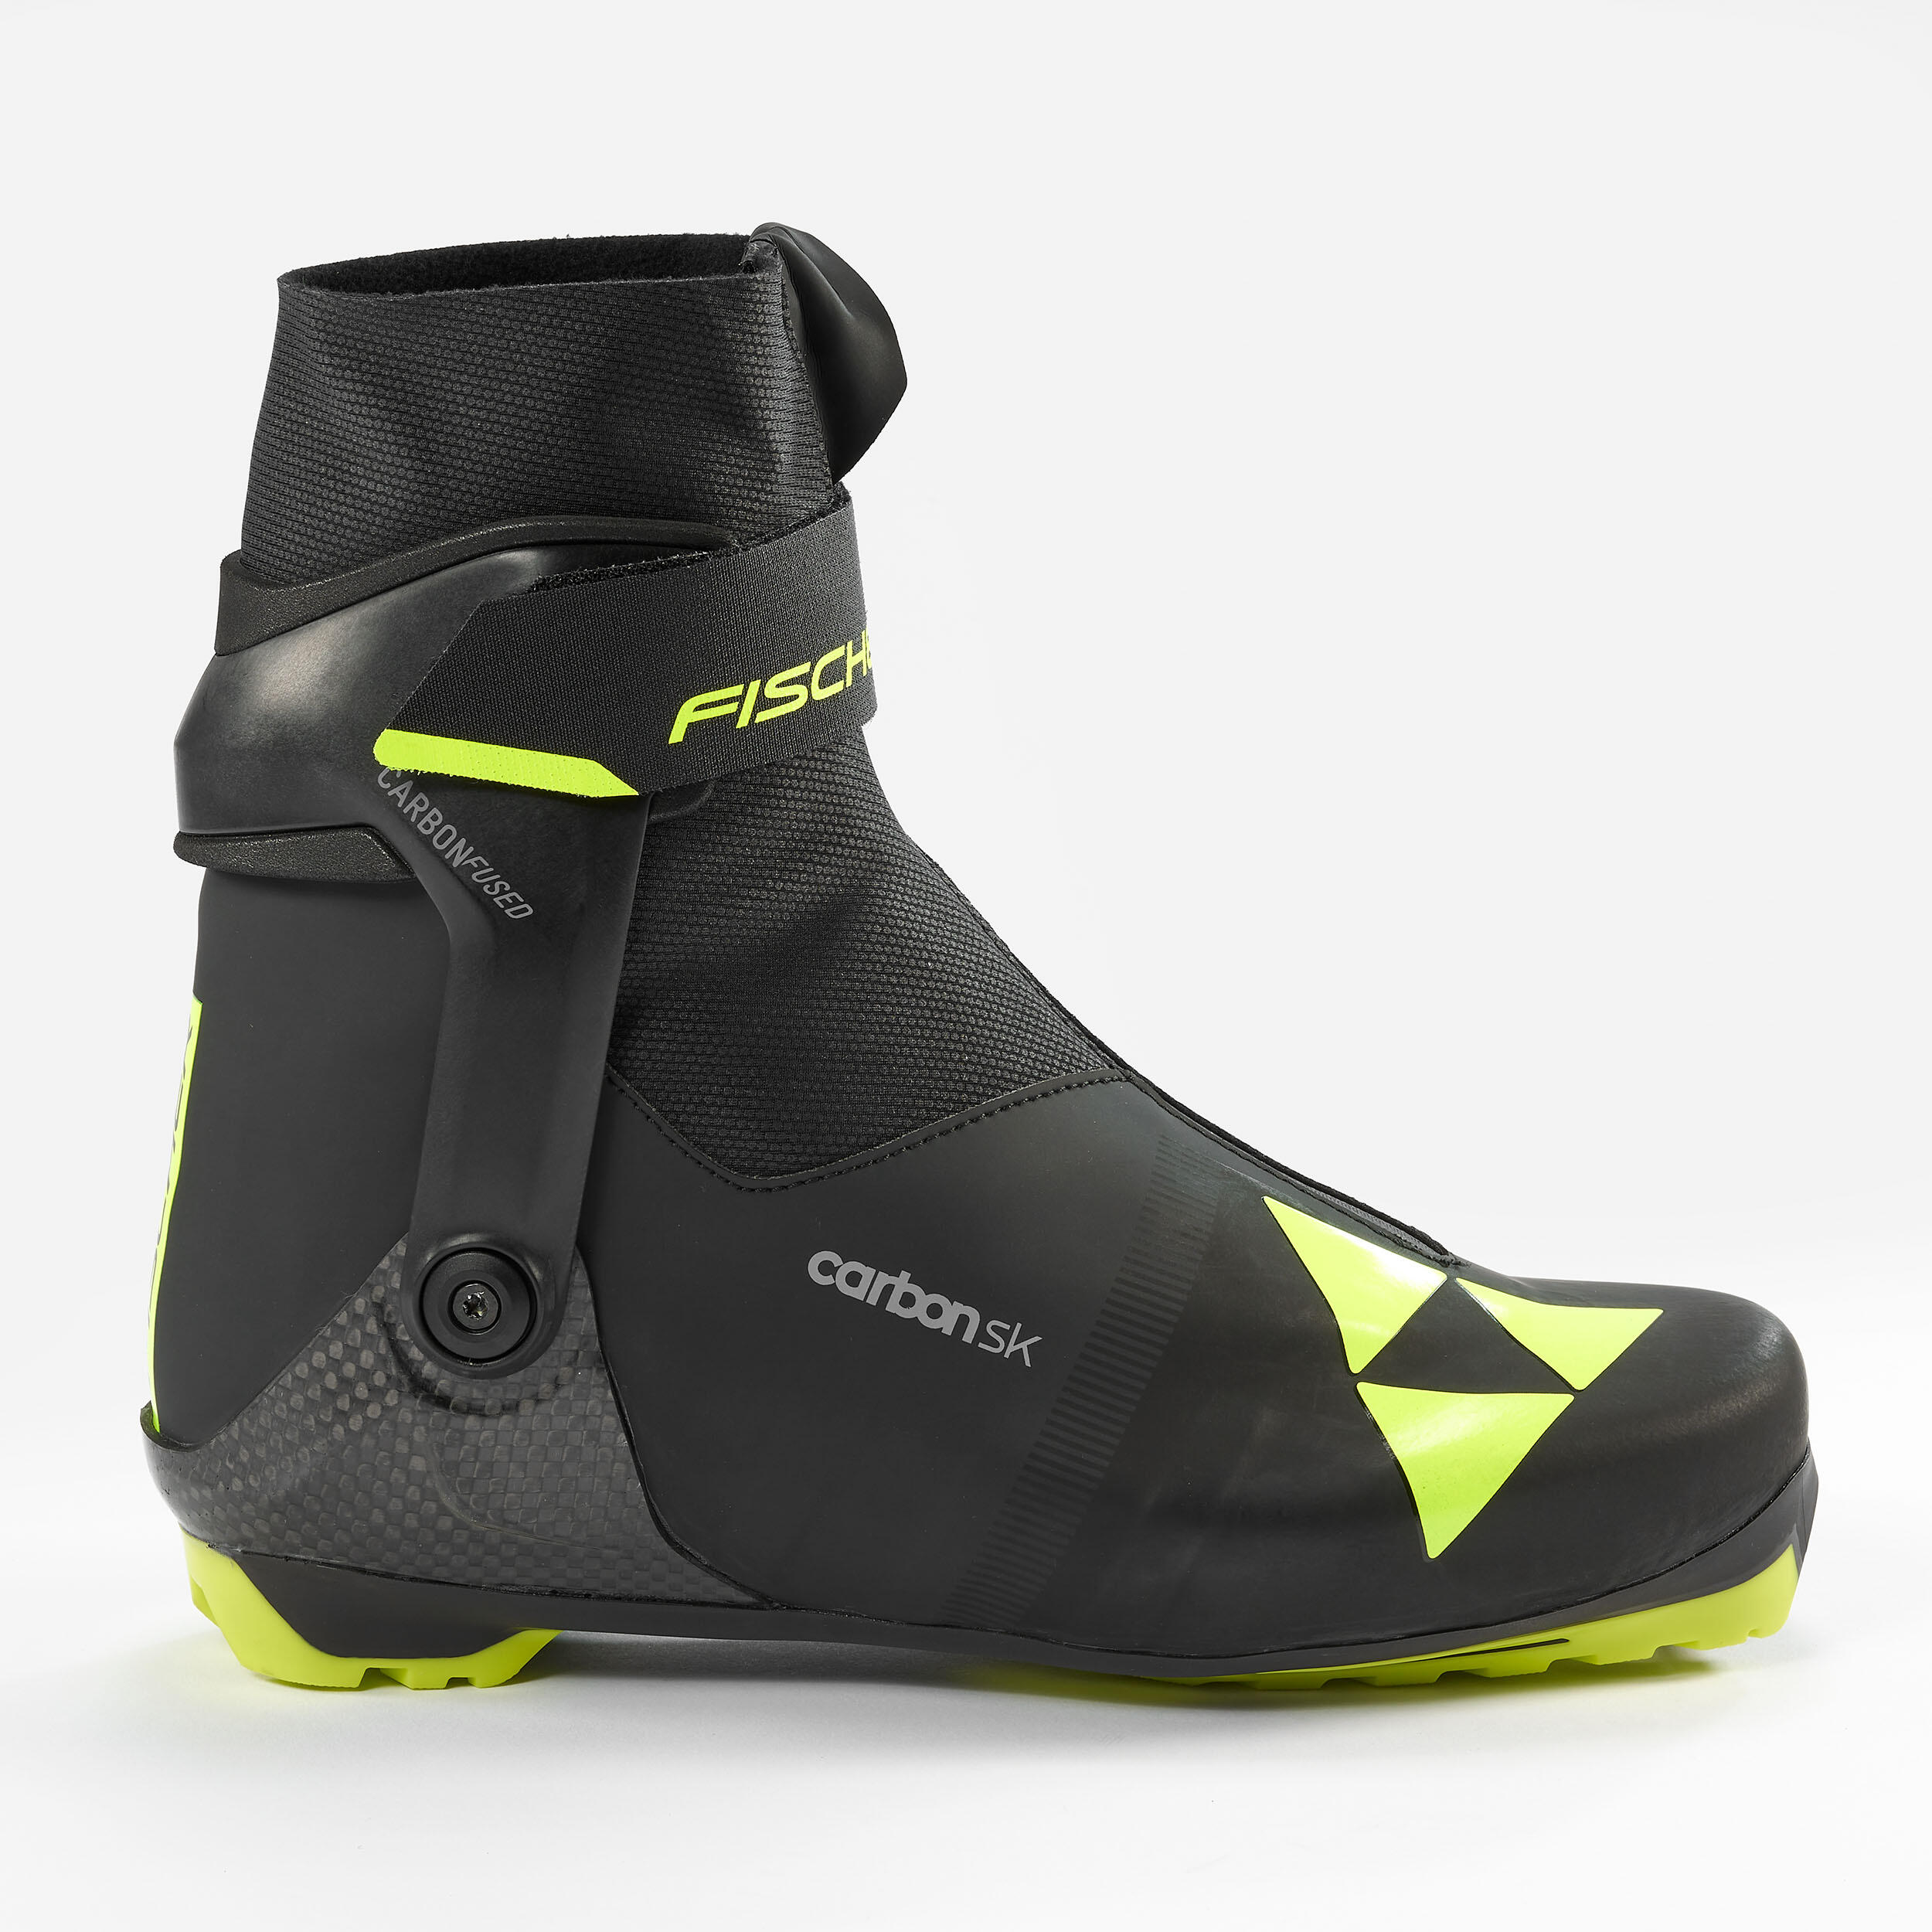 CROSS-COUNTRY SKI SKATING BOOTS - FISCHER CARBON 2/7